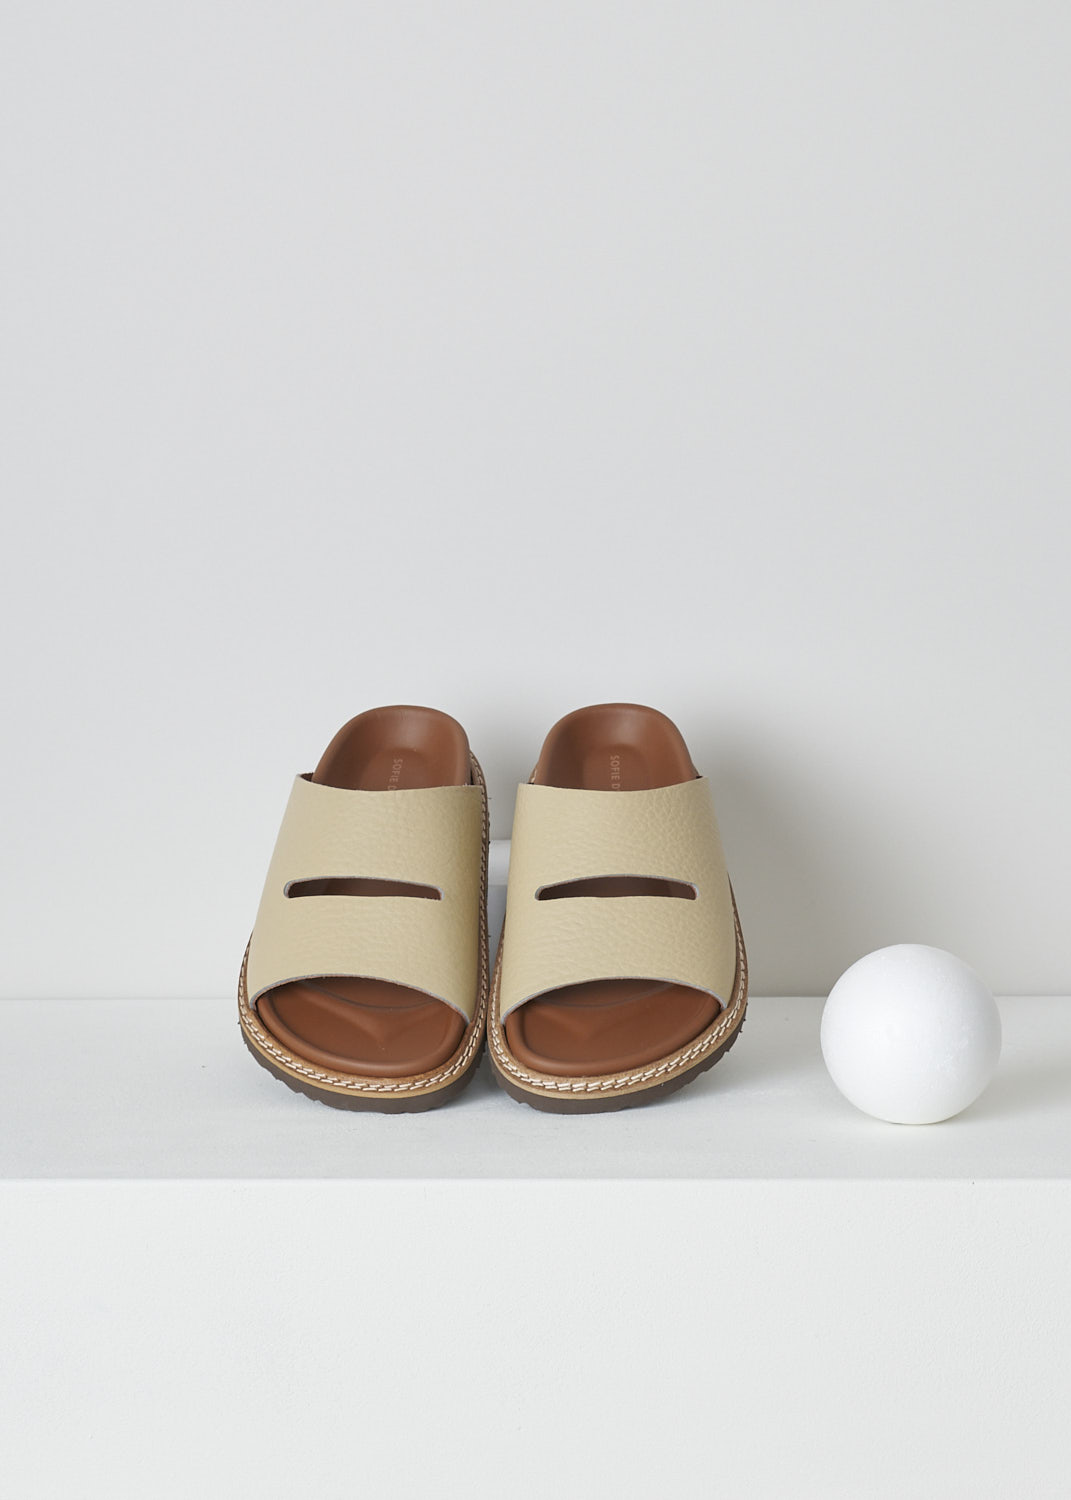 SOFIE, Dâ€™HOORE FABIA SLIP-ON SANDALS IN STONE, FABIA_LNAT_STONE, Beige, Top, These slip-on sandals have a wide footbed with stitching along the soles. A broad strap with a horizontal cut-out goes across the vamp. These sandals have a round open-toe.
